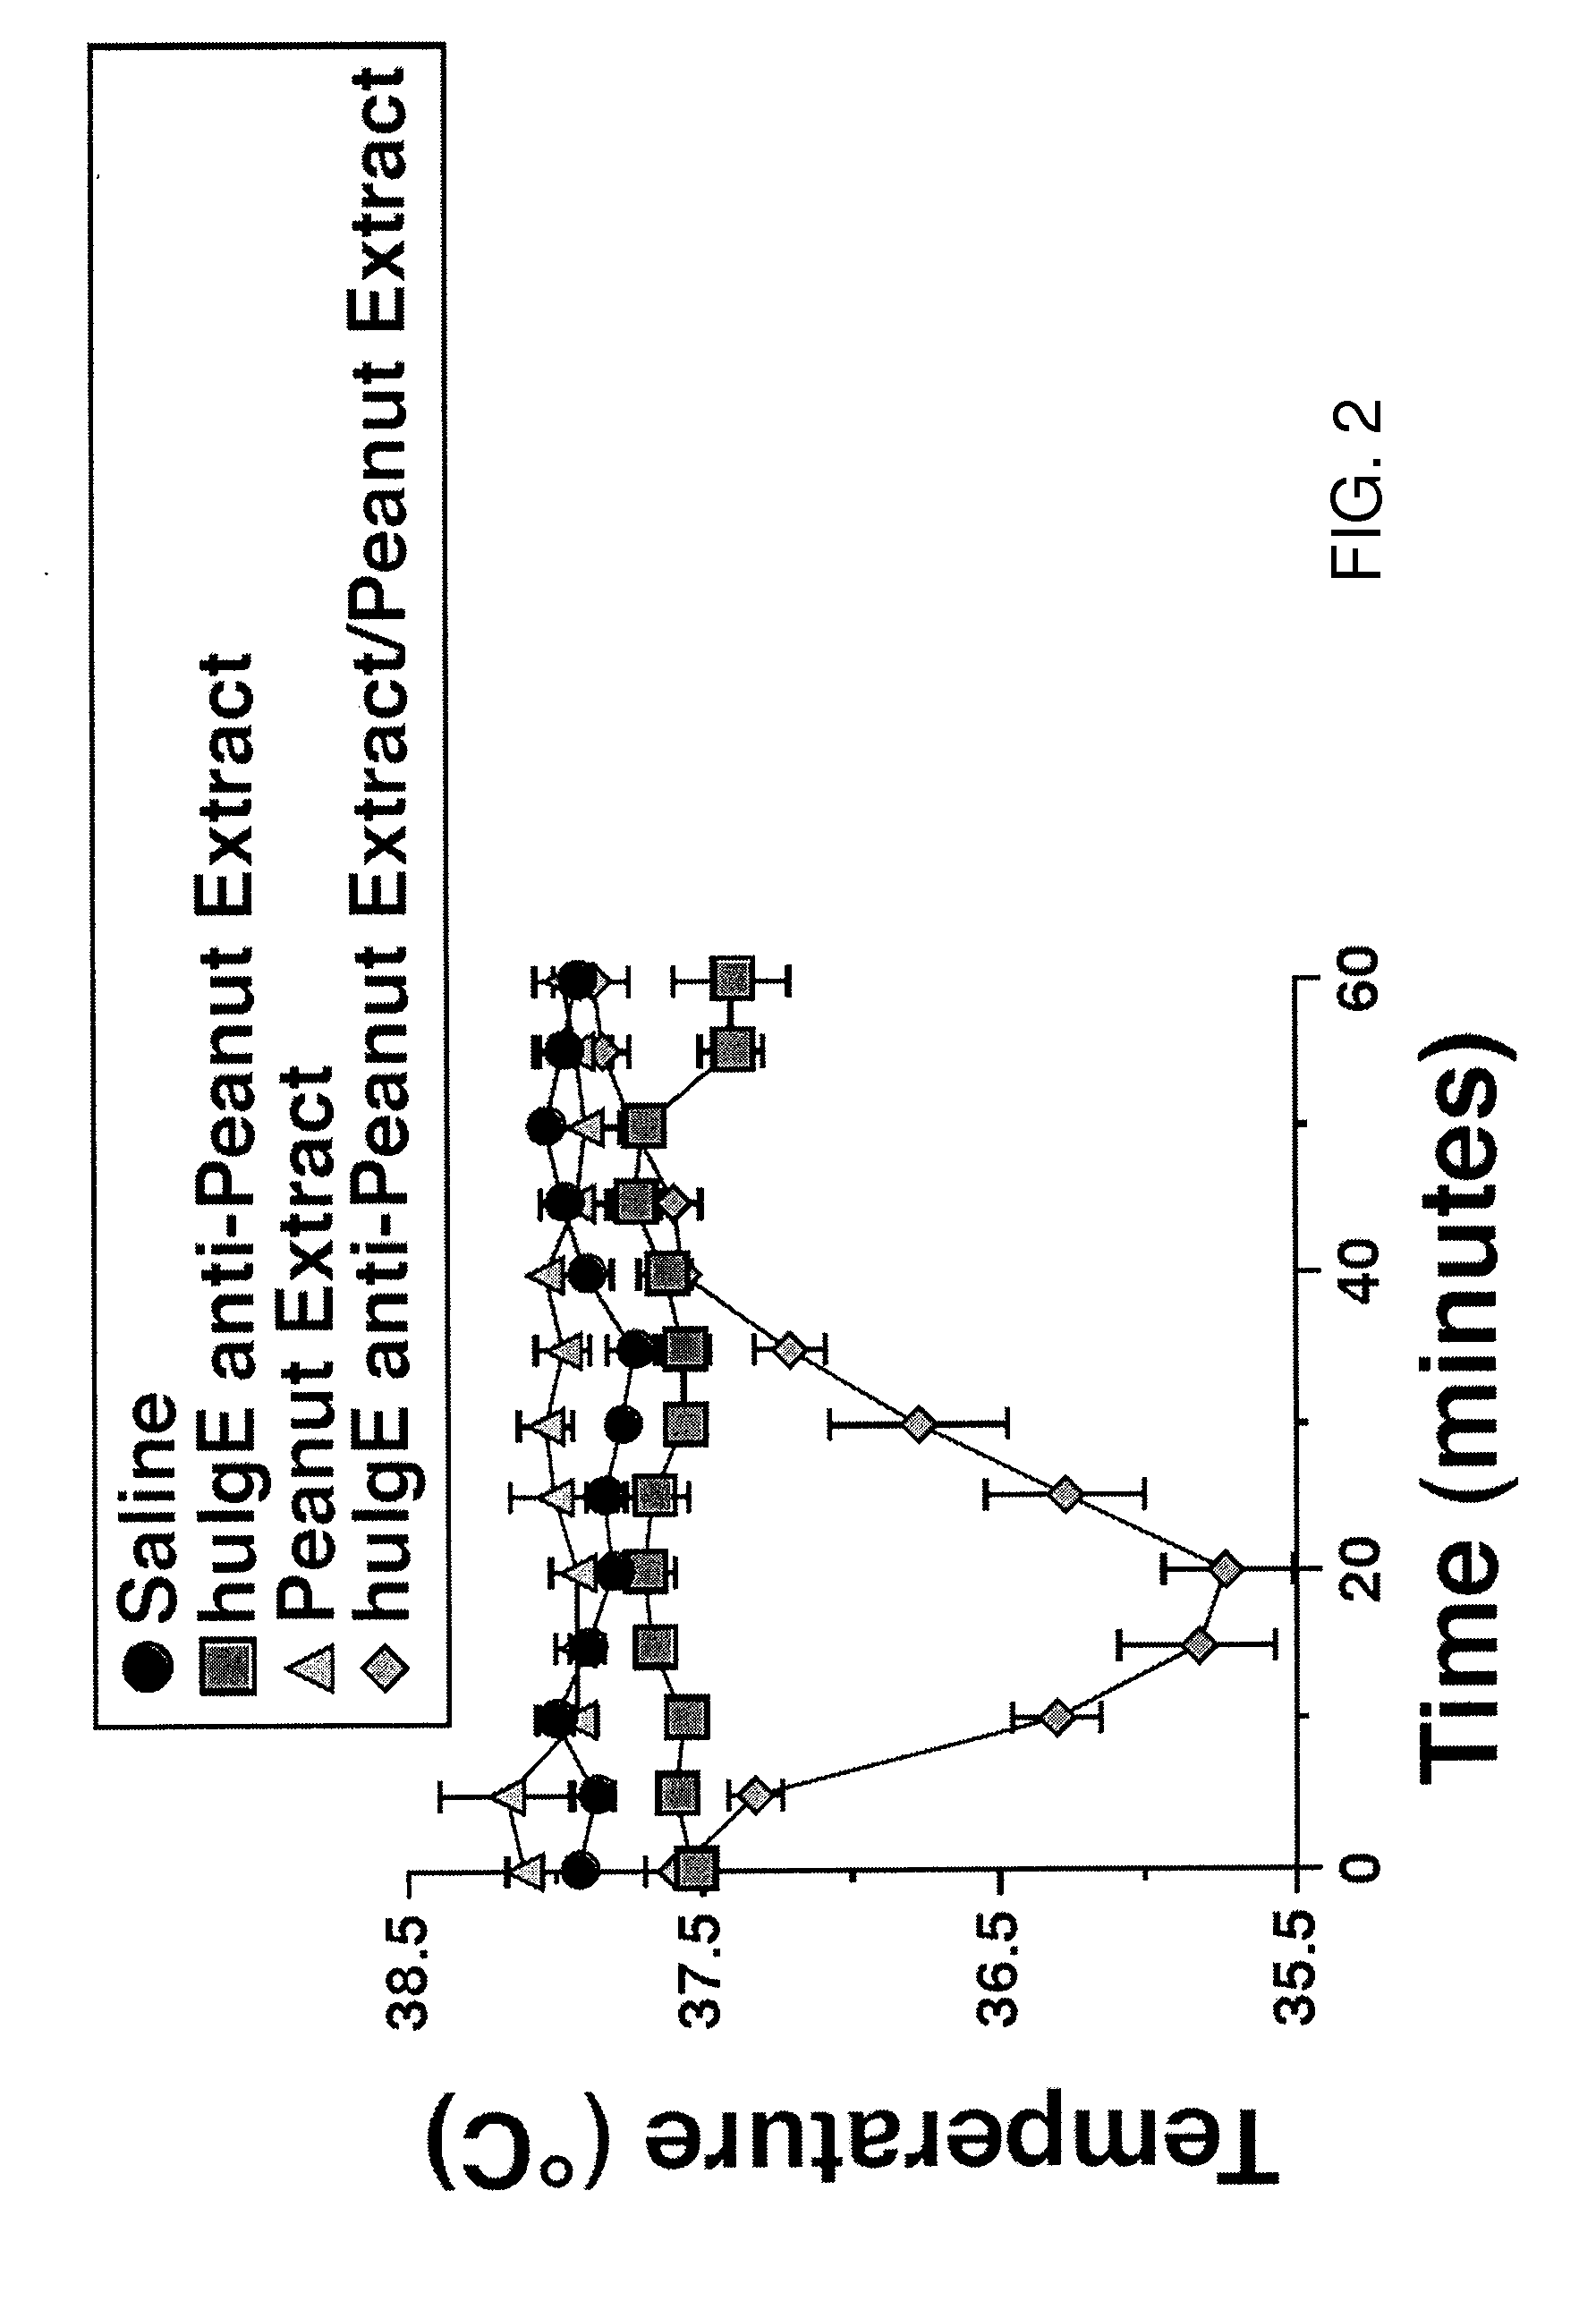 Methods for suppressing allergic reactions